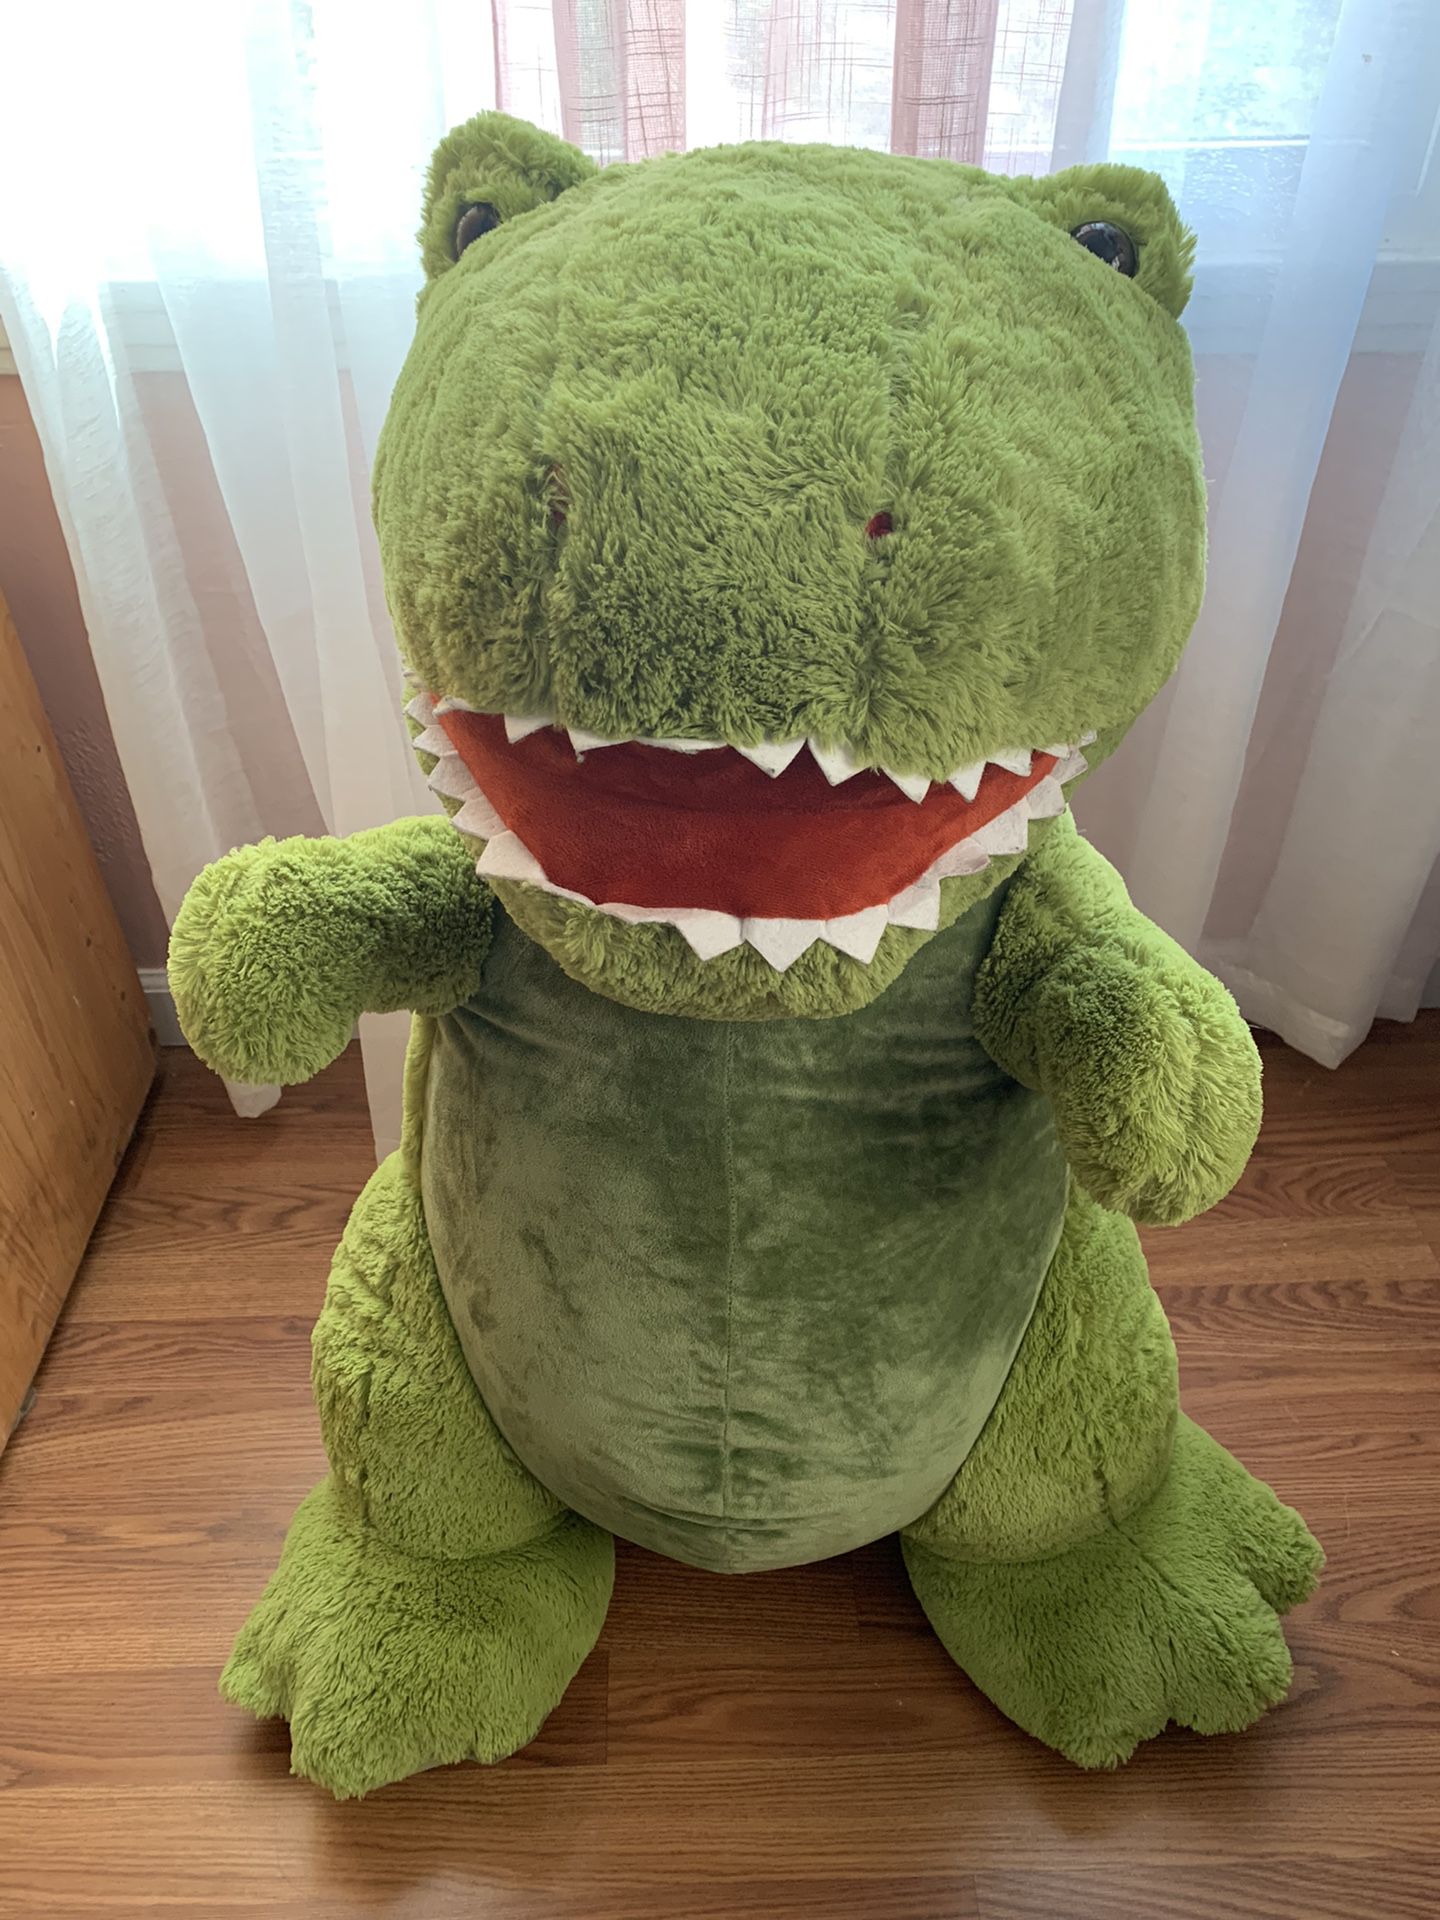 Rugrats Reptar Stuffed animal toy, item will make great gifts or an excellent addition to your collection.